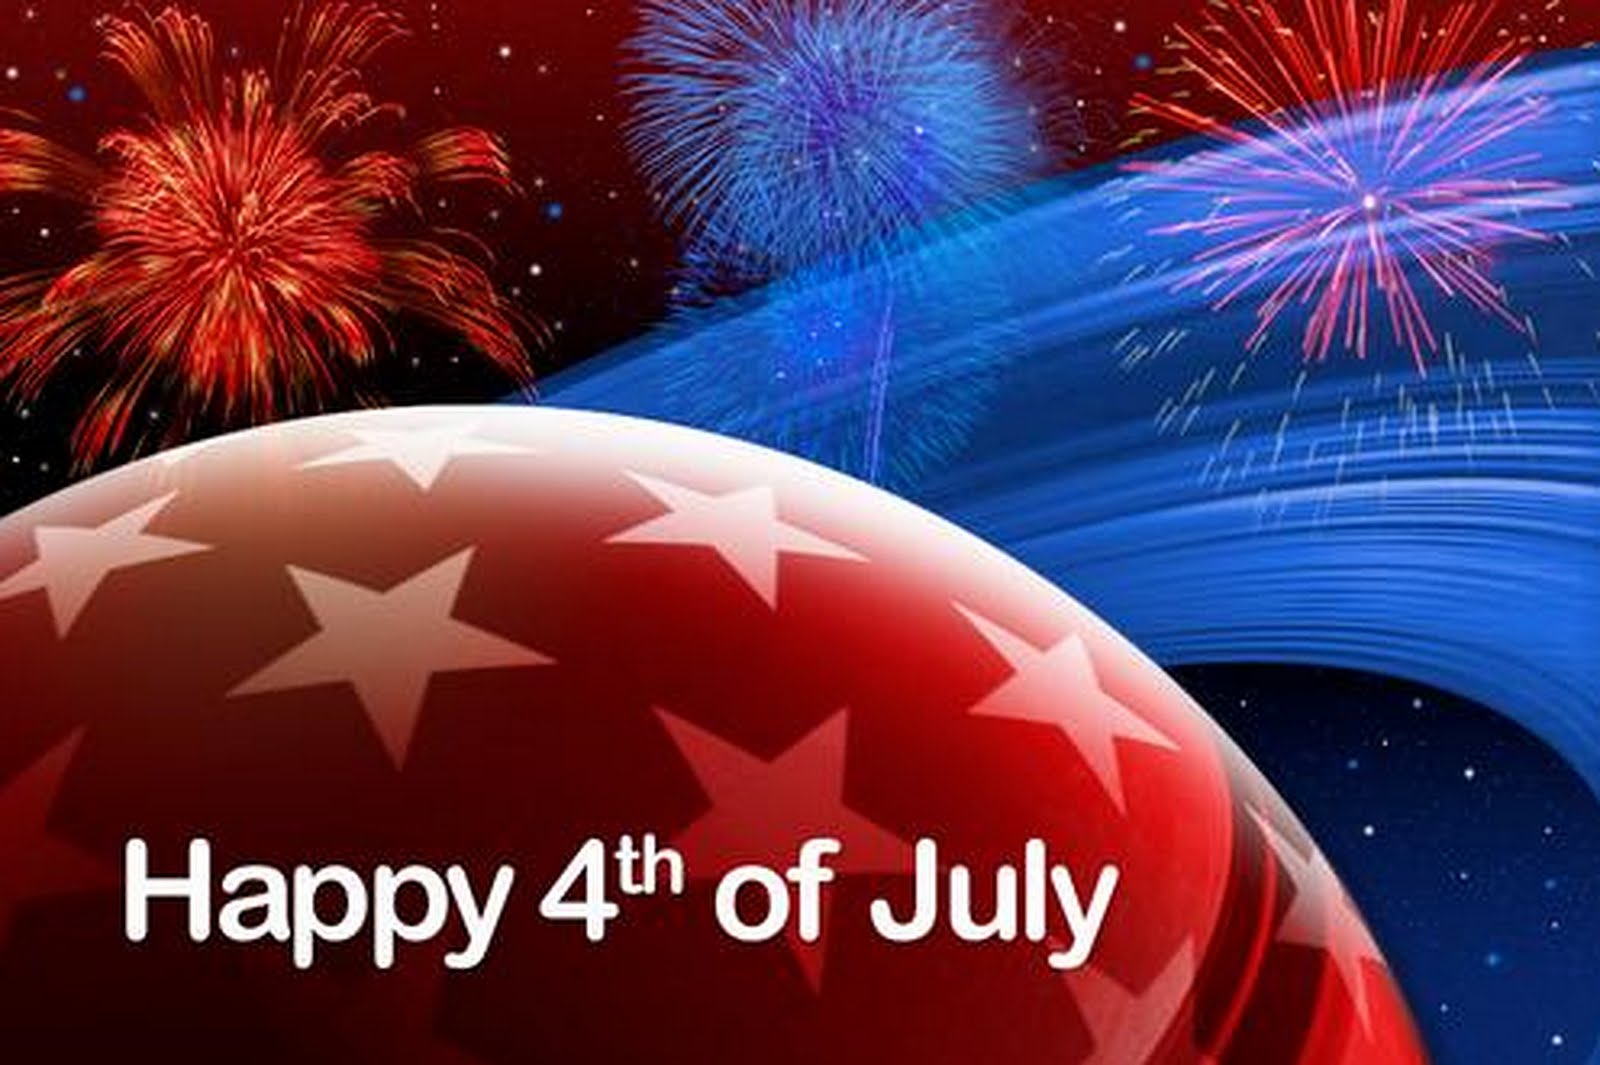 Public Domain Clip Art Photos and Images: Happy 4th of July from Outer ...